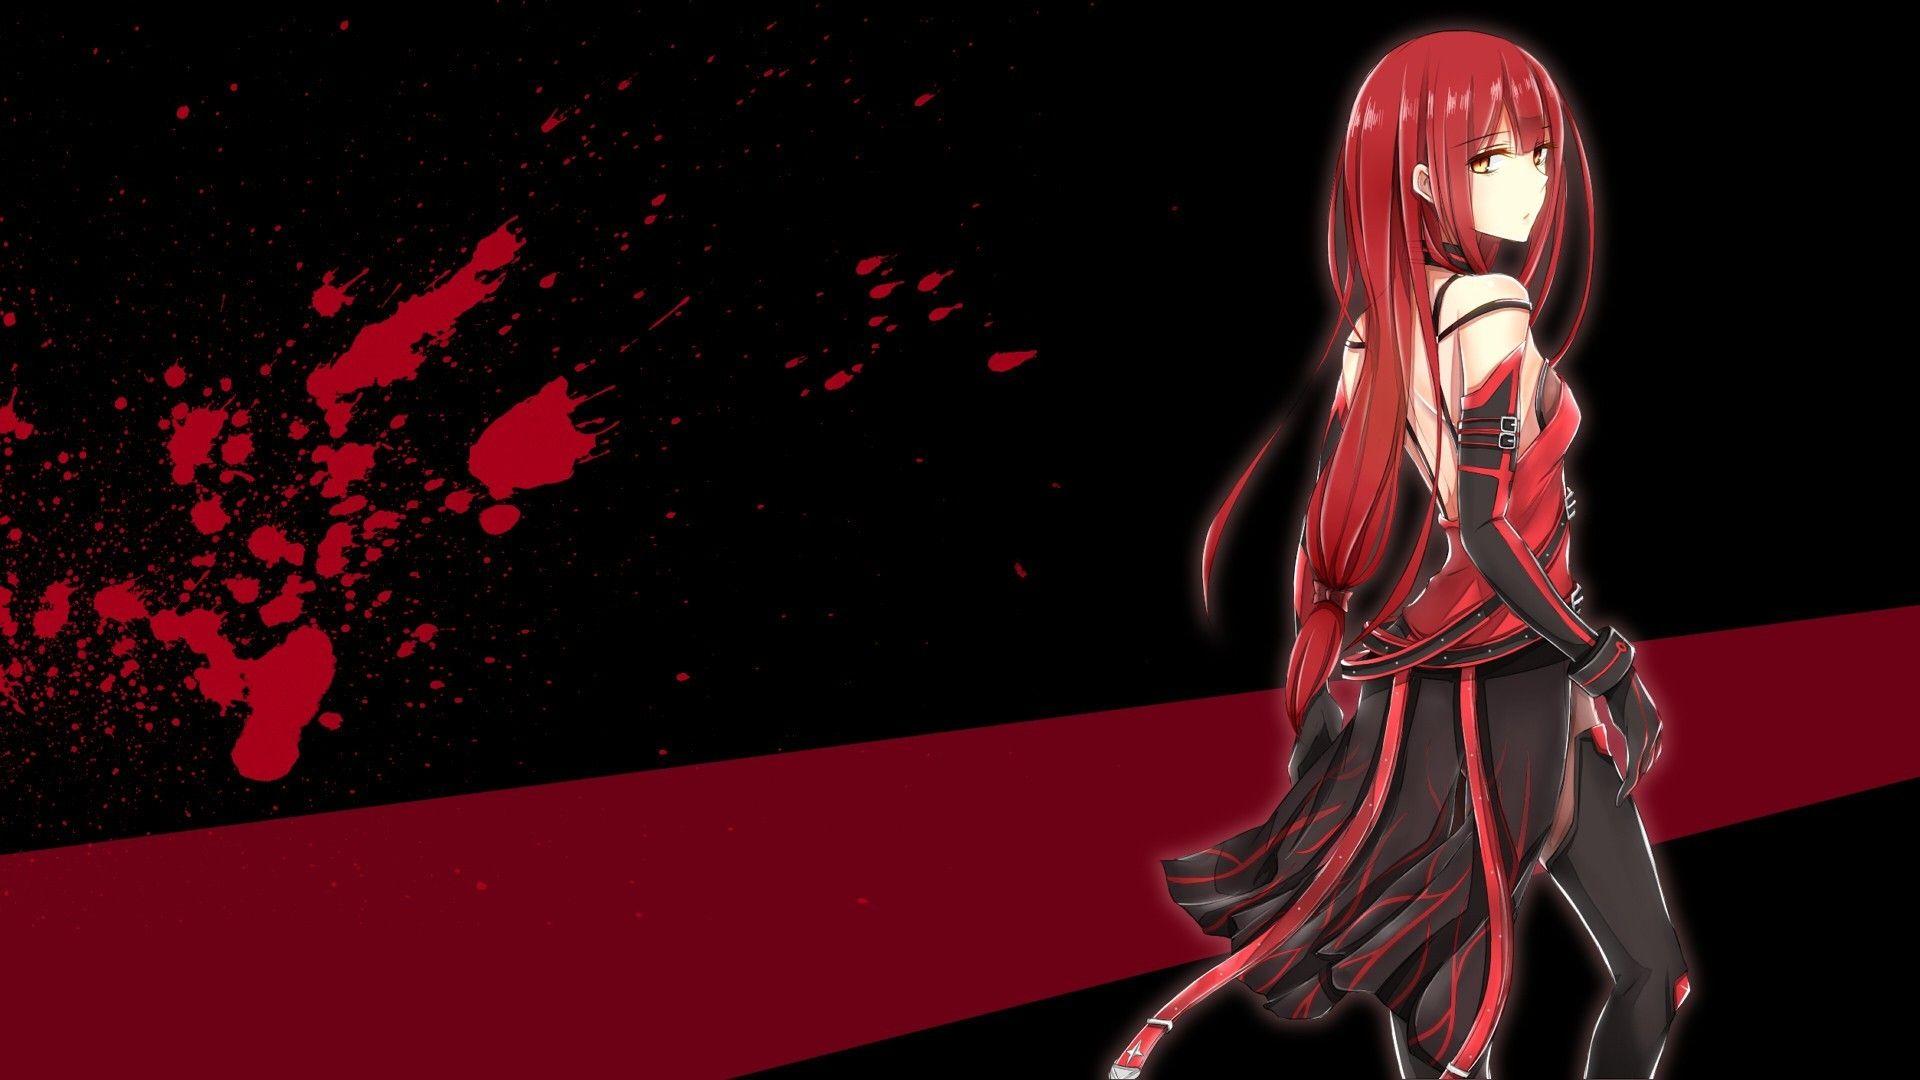 Black and Red Anime Wallpapers - Top Free Black and Red Anime Backgrounds - WallpaperAccess